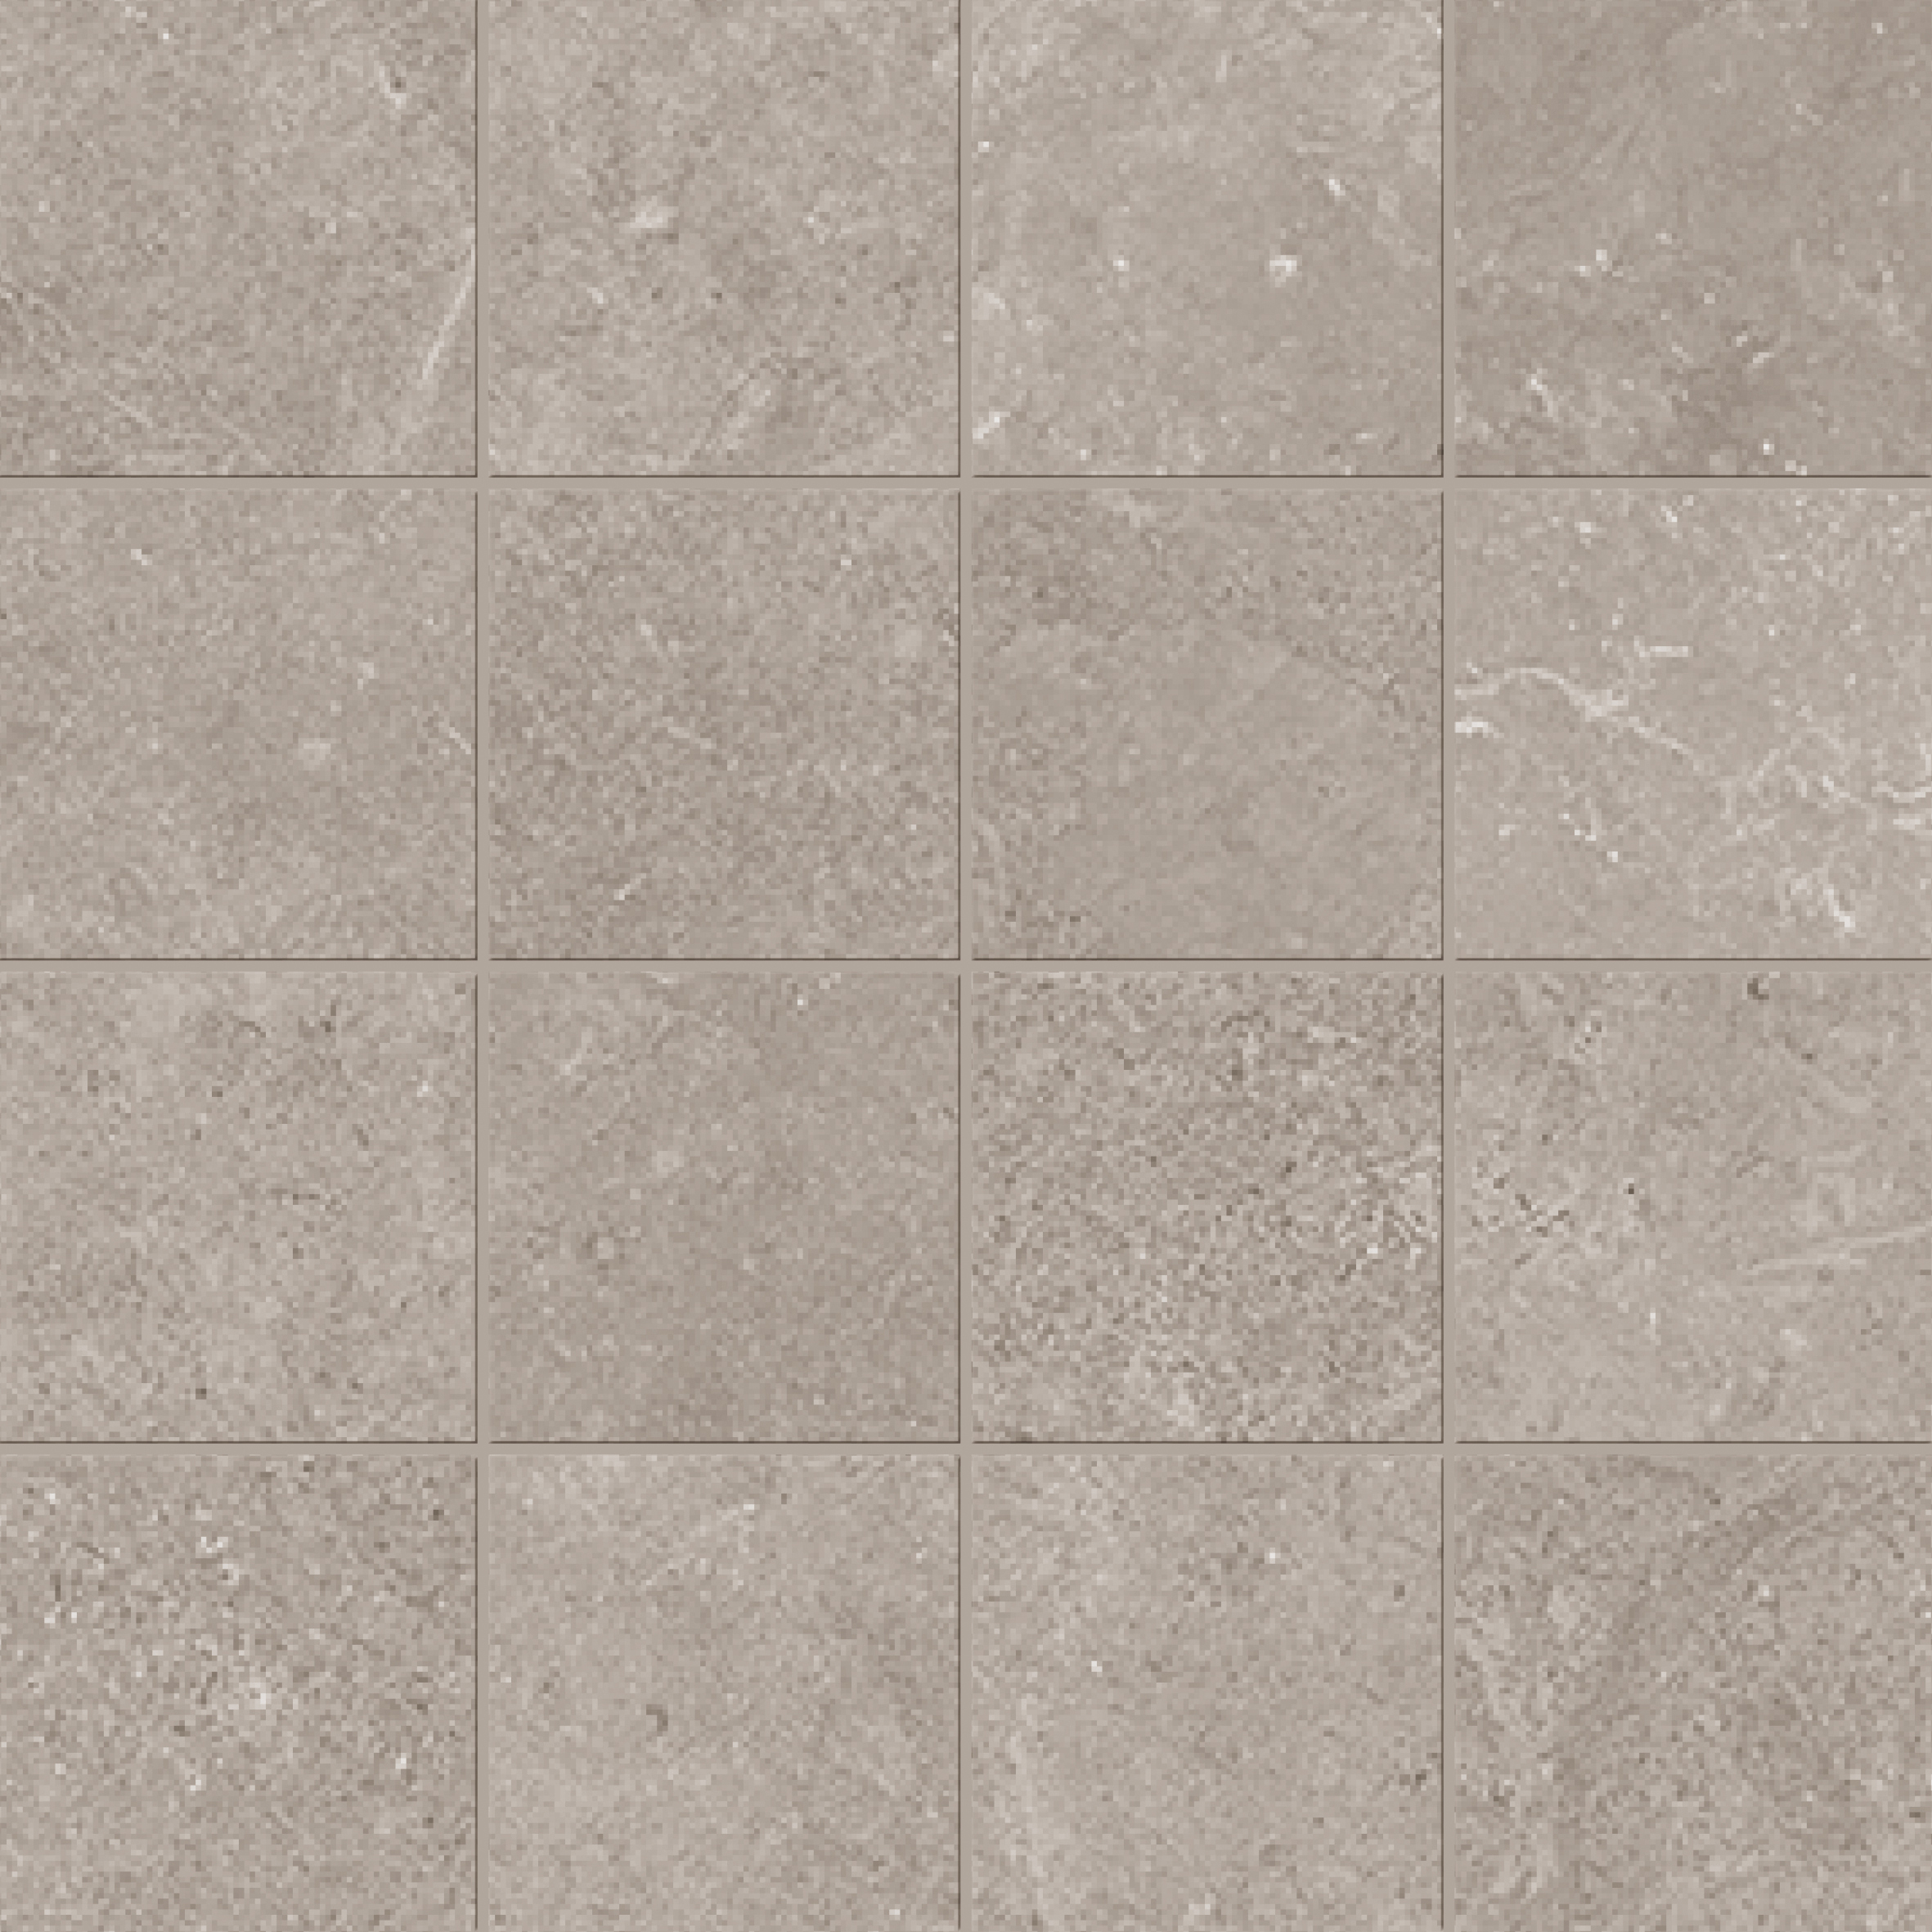 Panaria Prime Stone Silver Prime Antibacterial - Soft Mosaic 16 Pezzi PGZPM20 30x30cm rectified 9,5mm